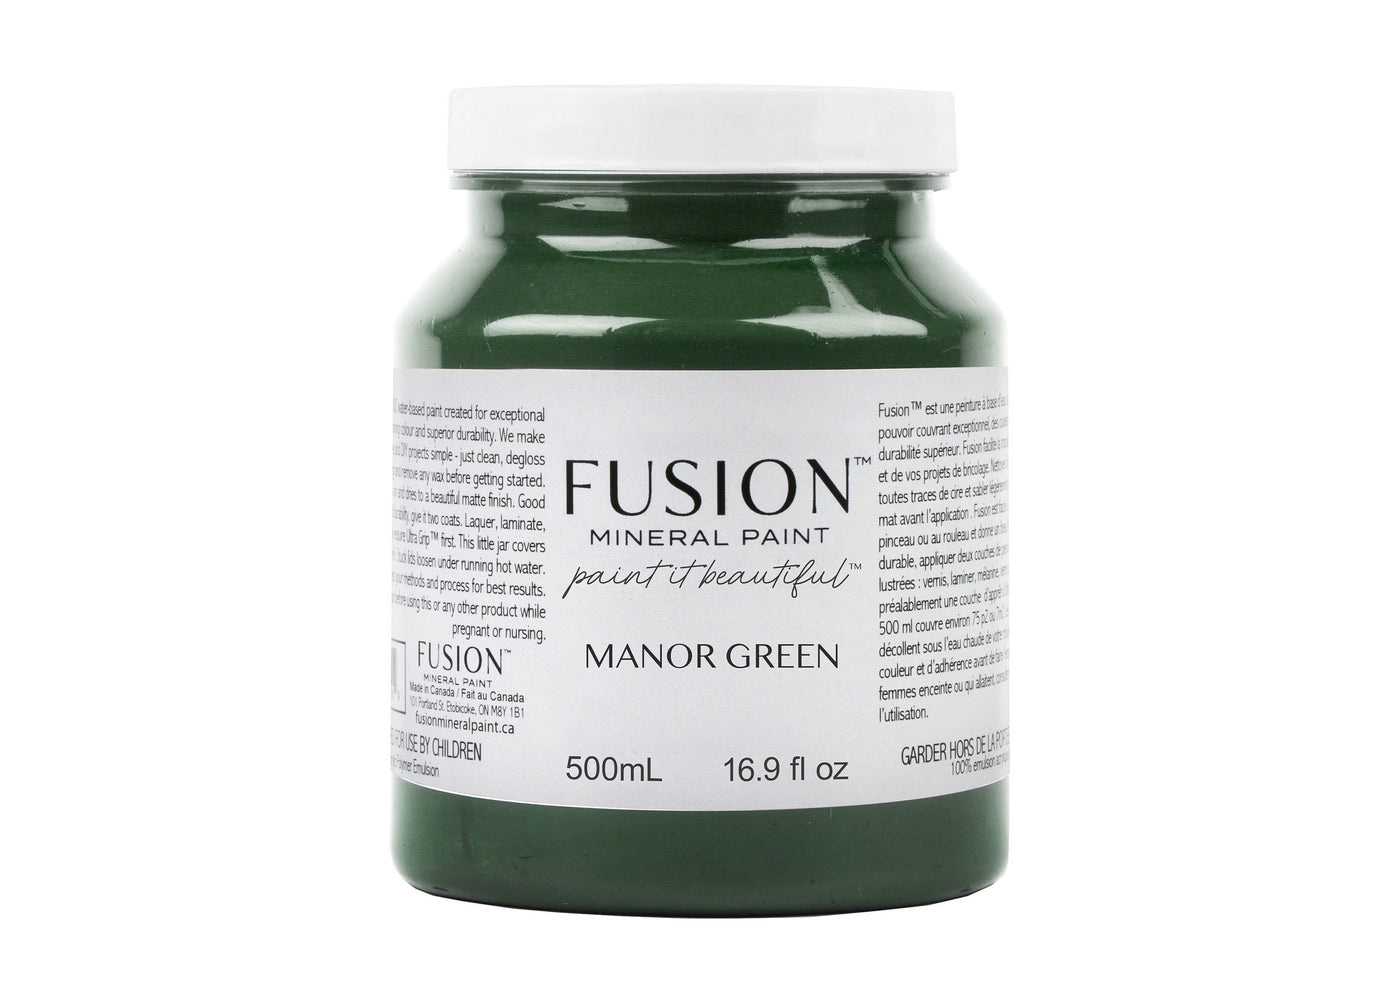 Deep green 500ml pint from Fusion Mineral Paint